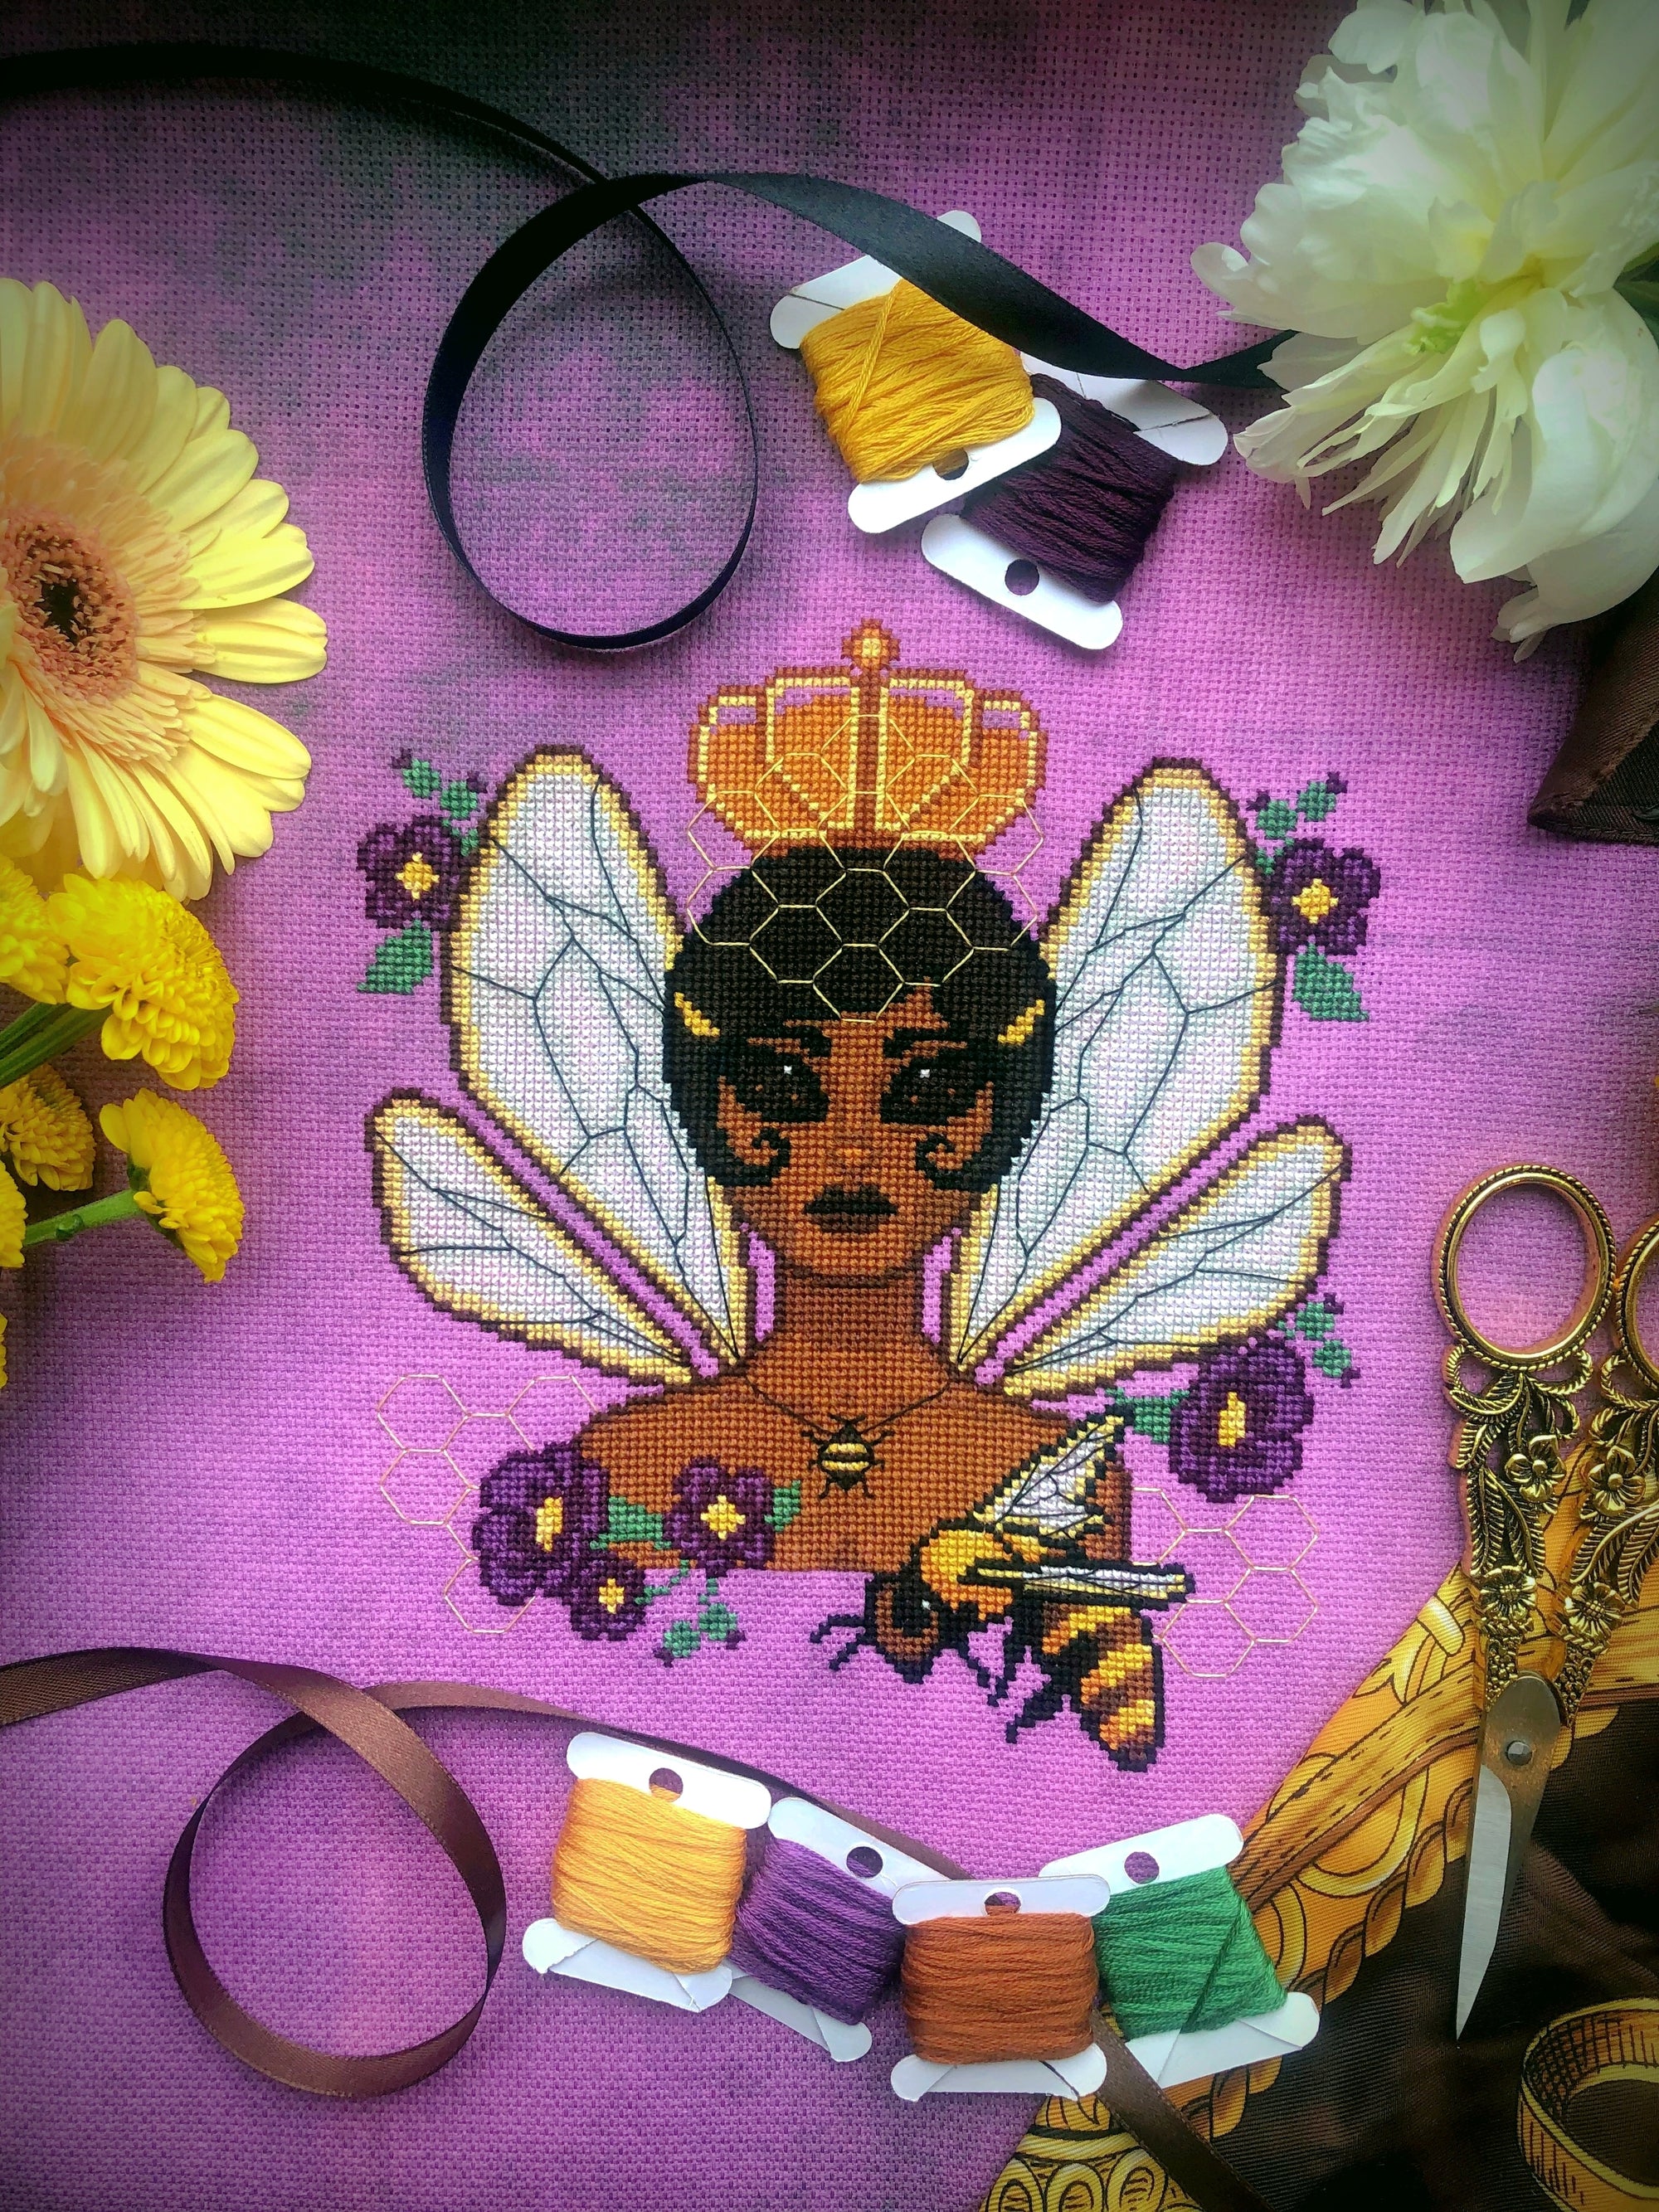 Vertical front view of Queen Bee cross stitch pattern. Queen Bee is represented as a black woman with dark hair that is cut into a bob. She is wearing an orange crown and has the wings of a bee. She wears a necklace and is surrounded by flowers.